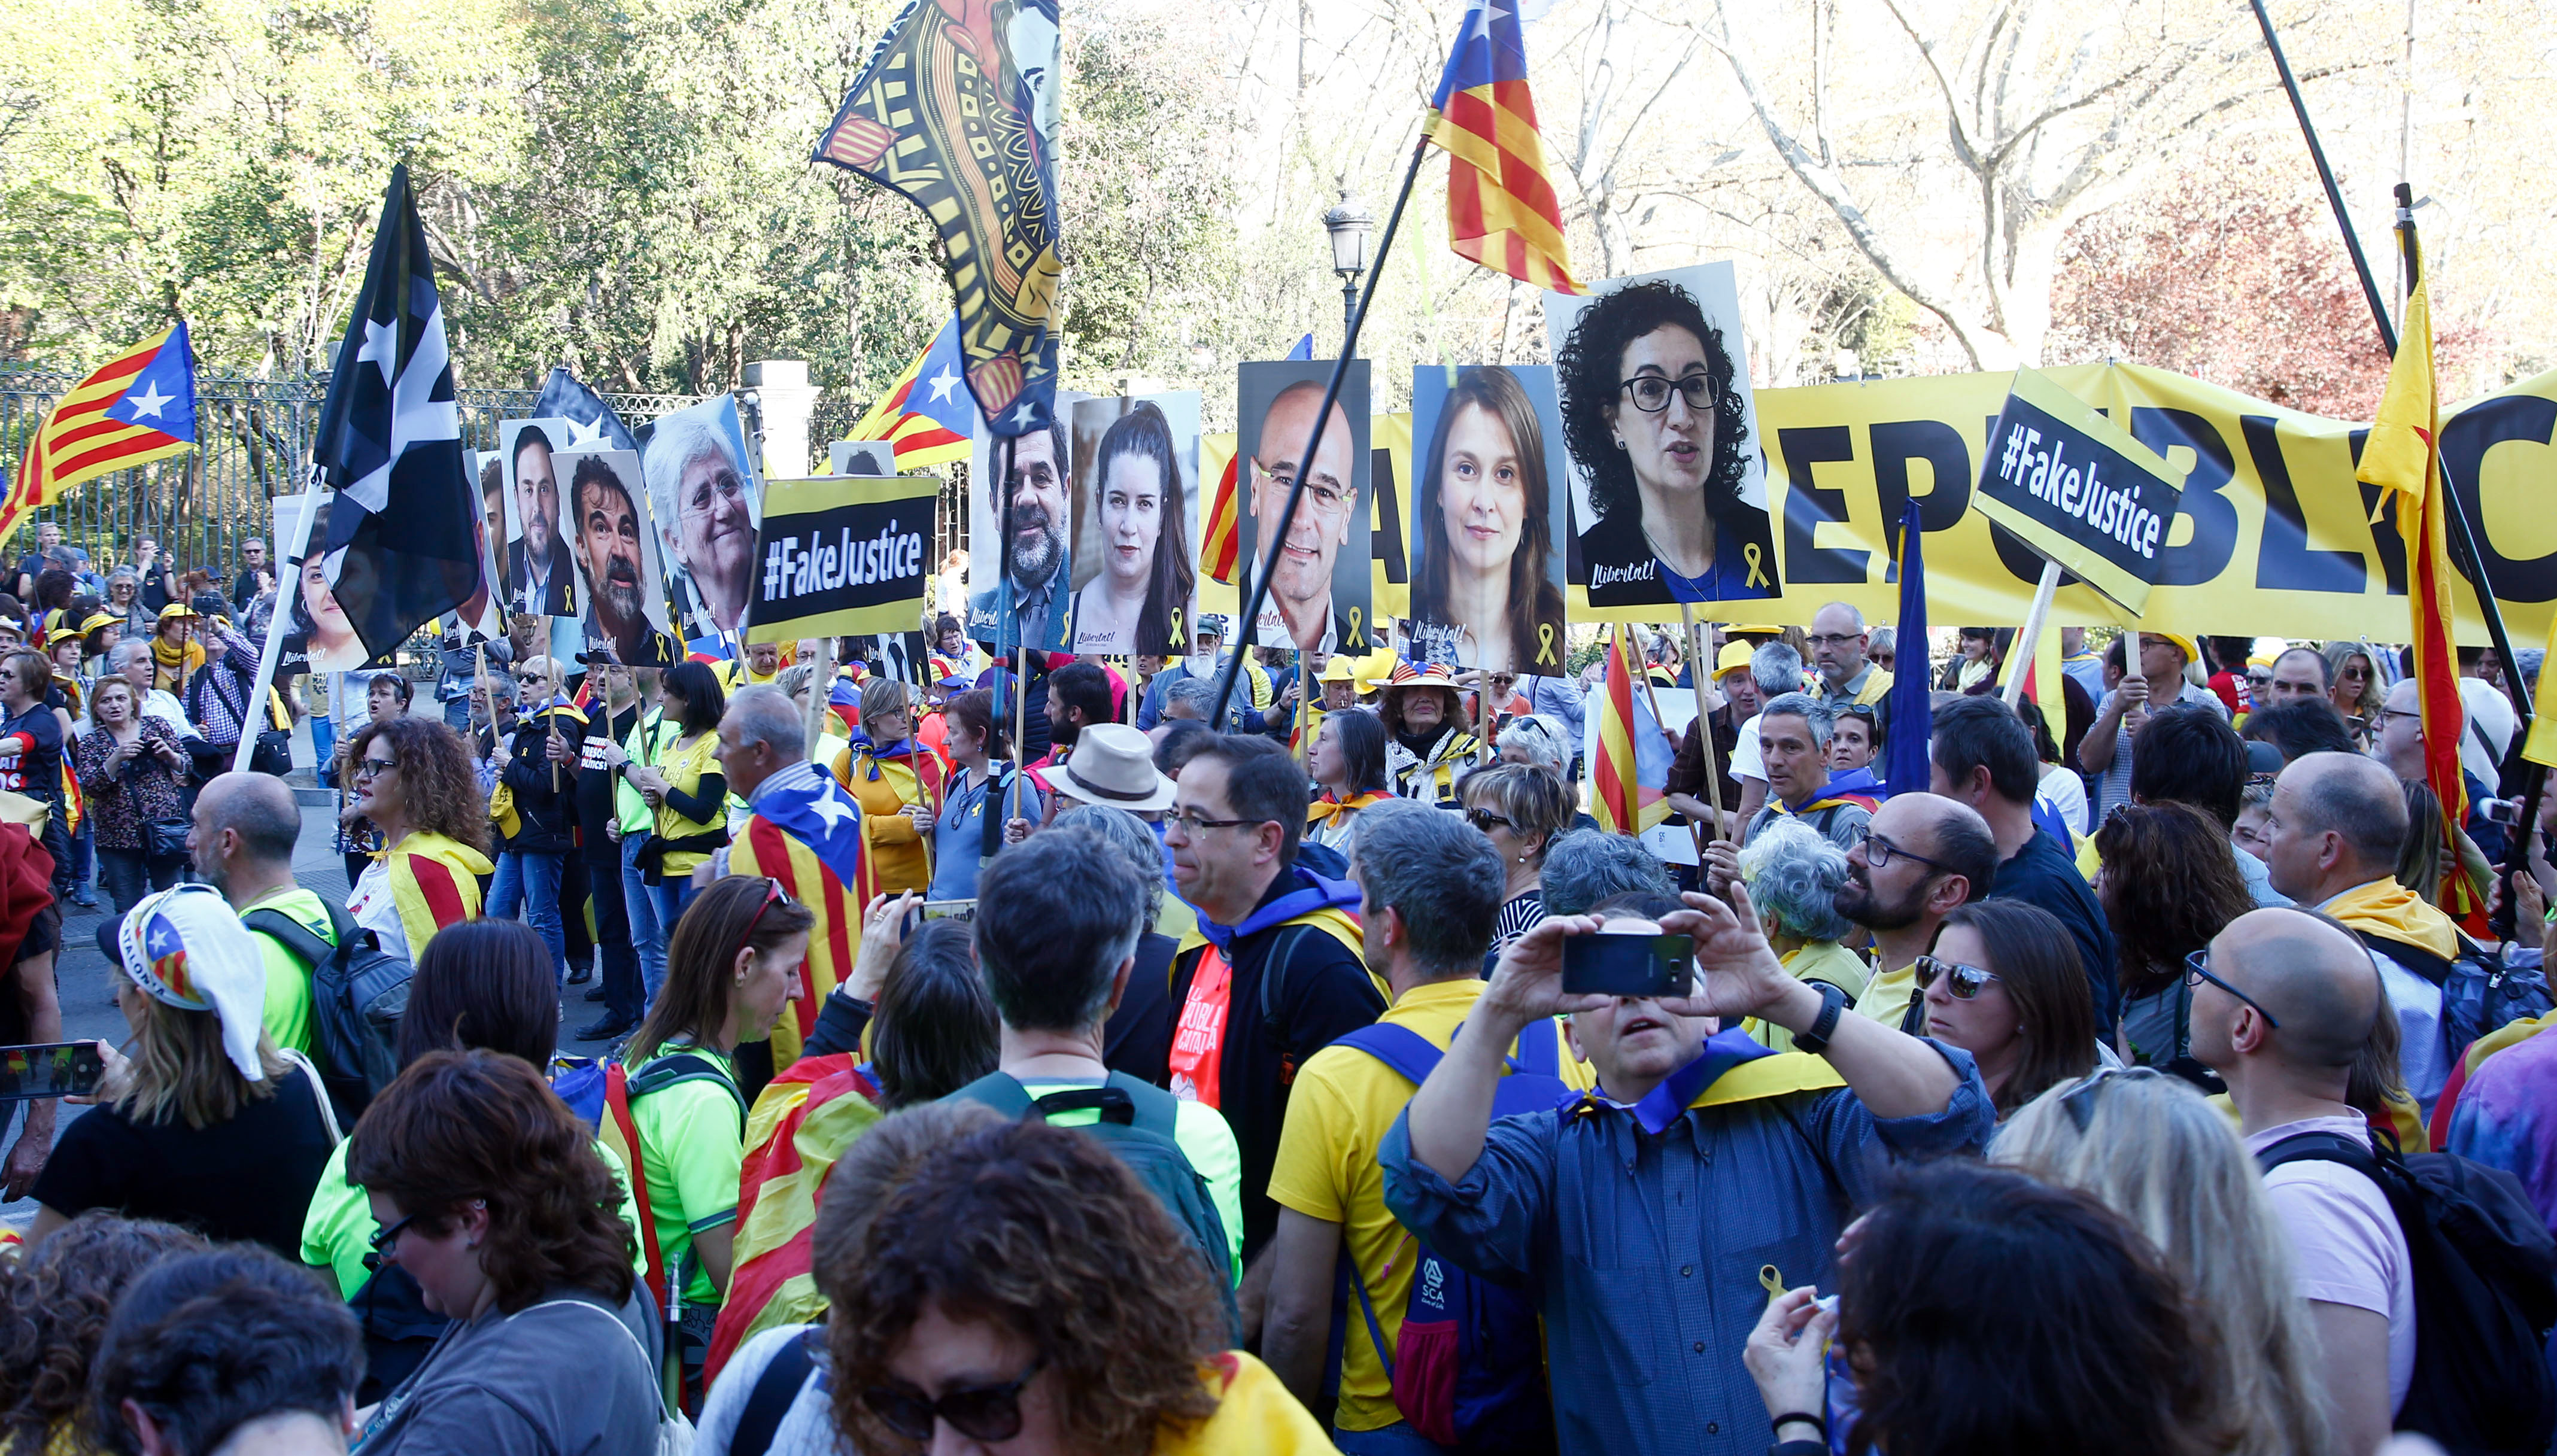 Demonstrators in Madrid protesting against independence trial (by Javier Barbancho)